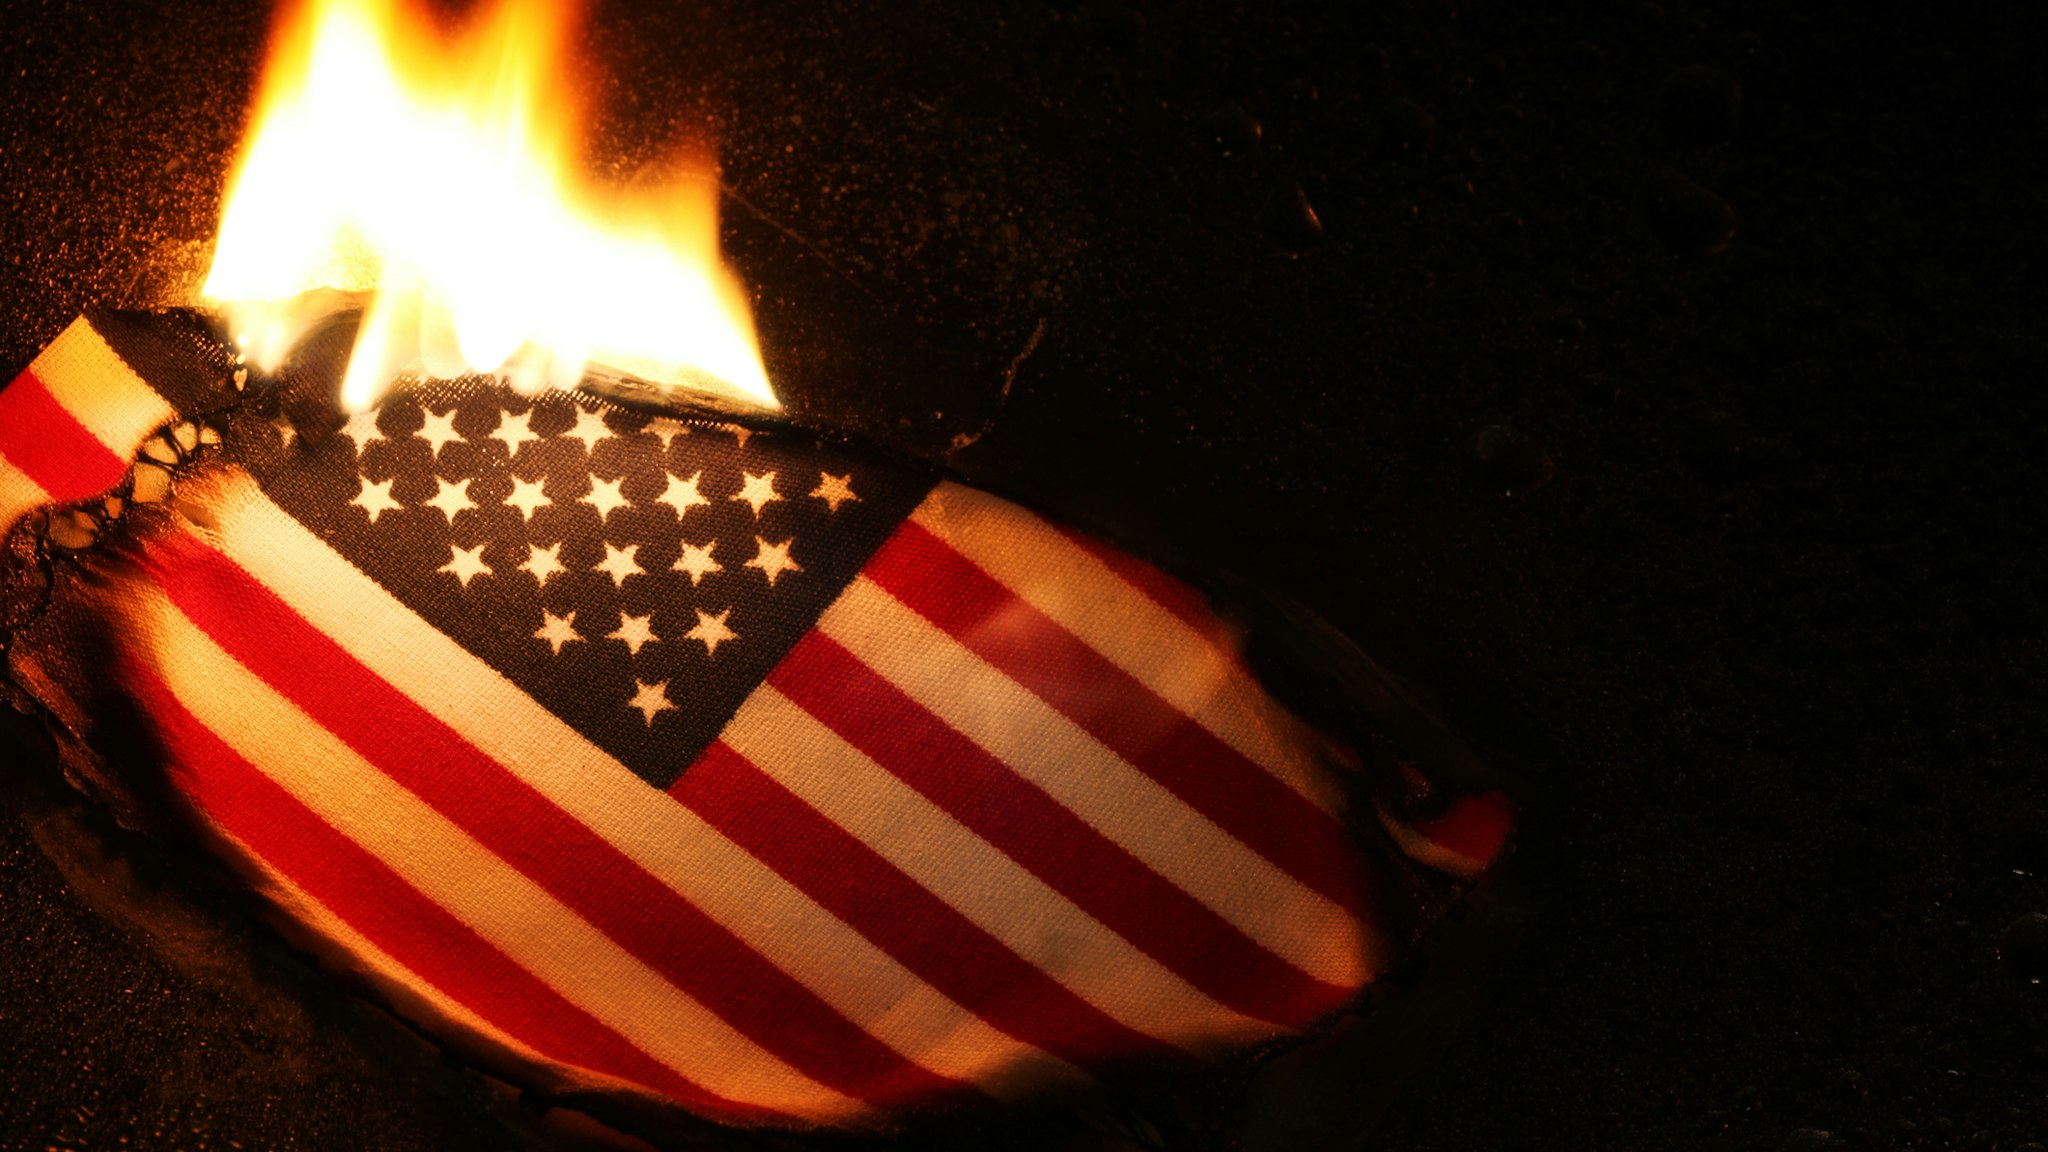 Burning American flag, perhaps in protest